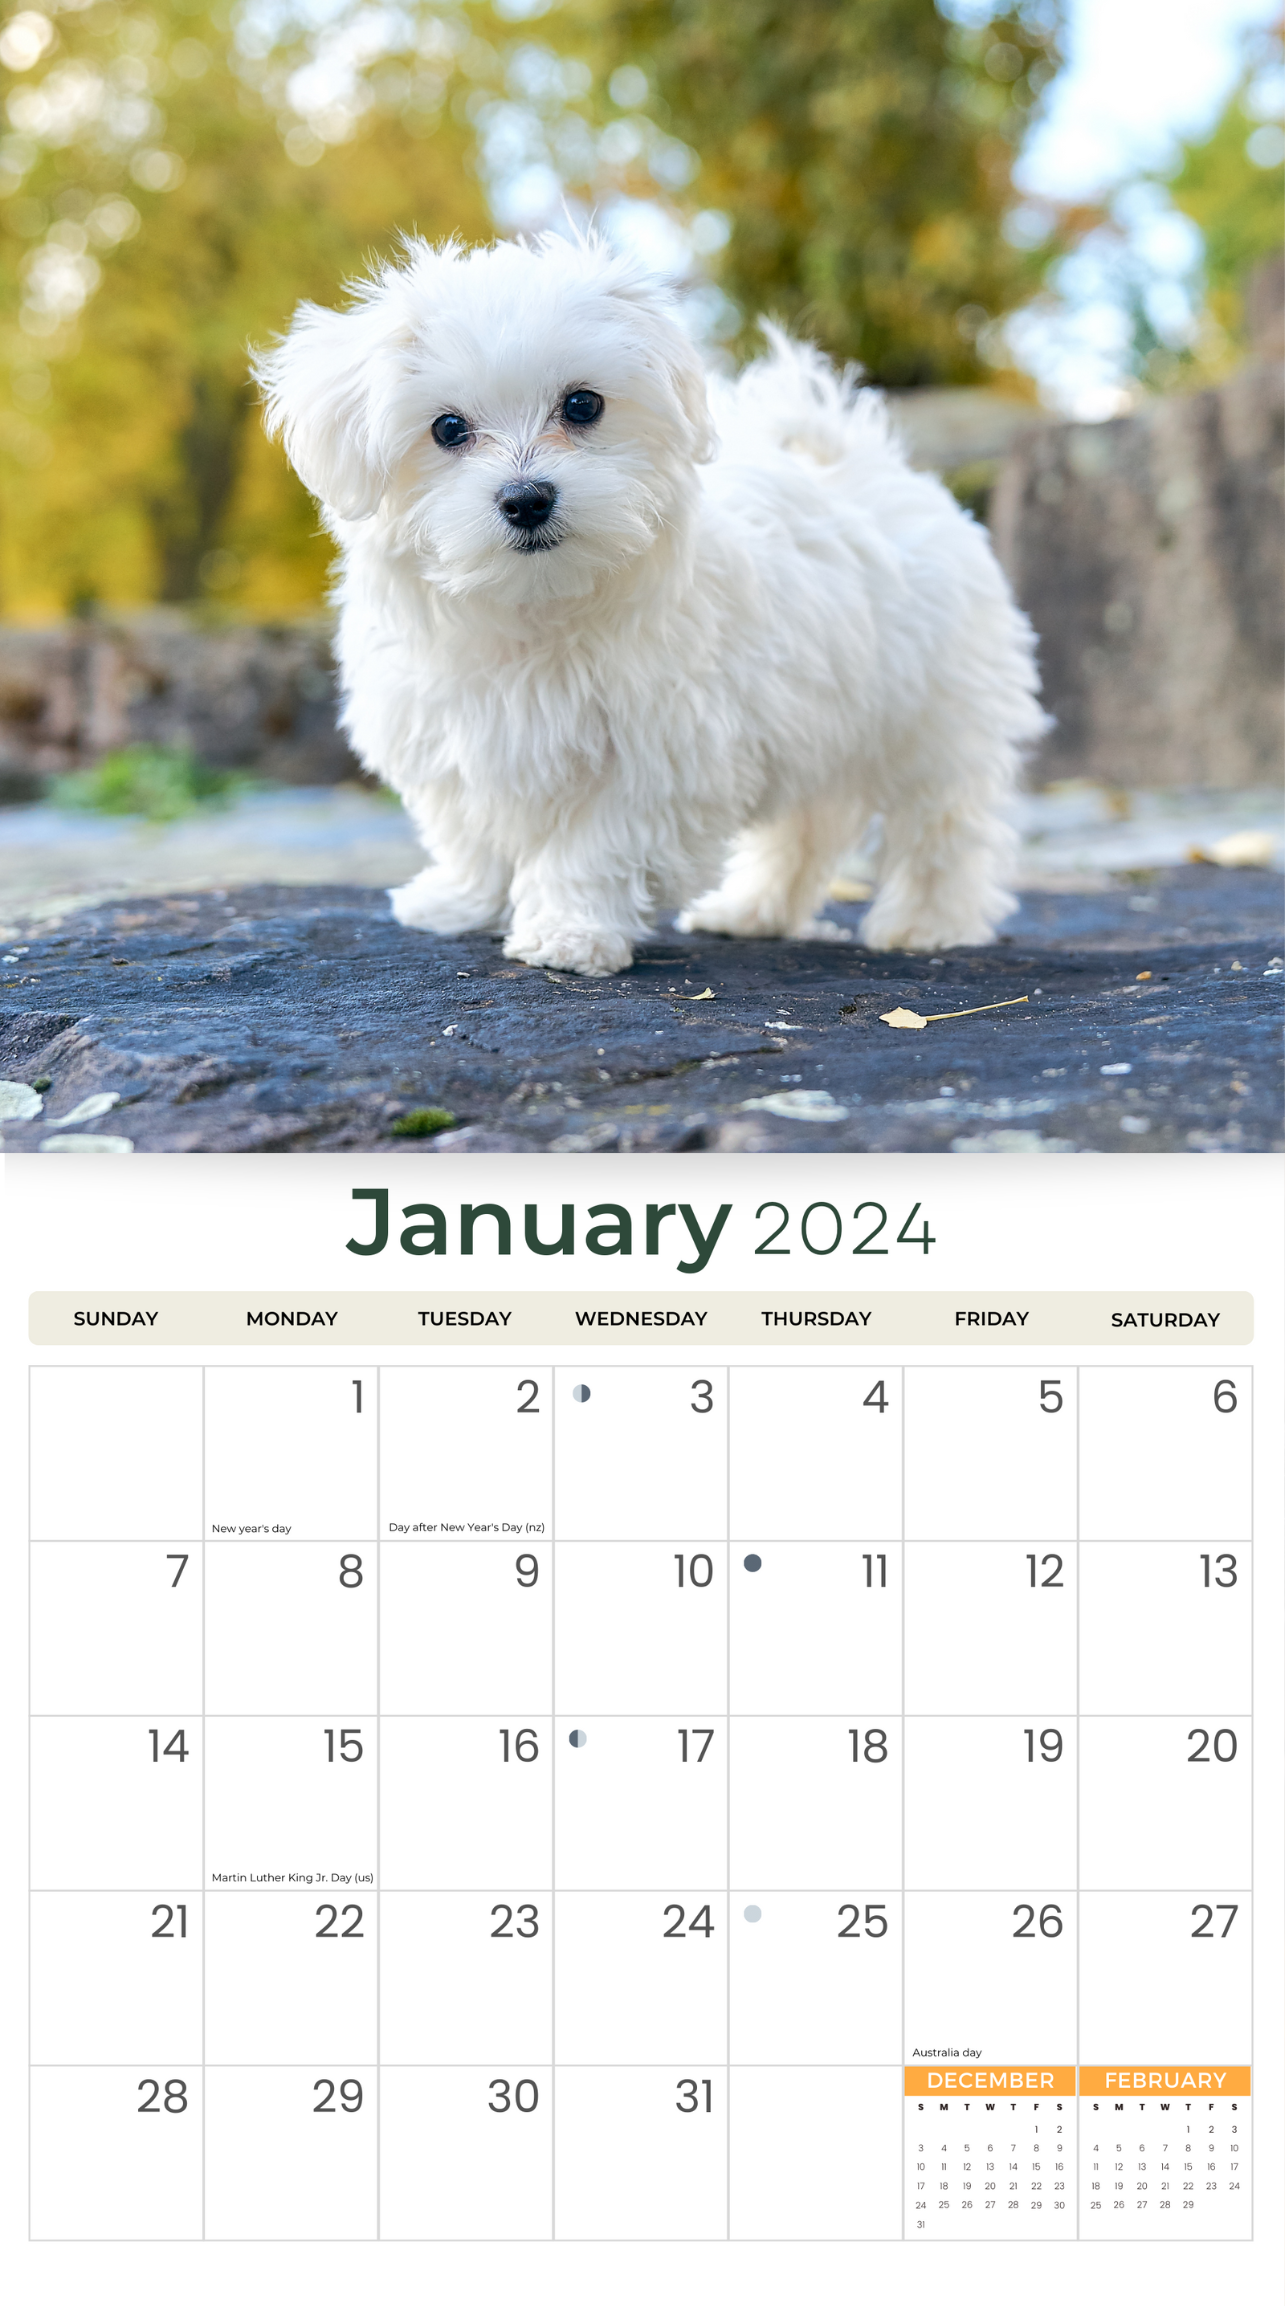 2024 Maltese Dogs & Puppies - Deluxe Wall Calendar by Just Calendars - 16 Month - Plastic Free